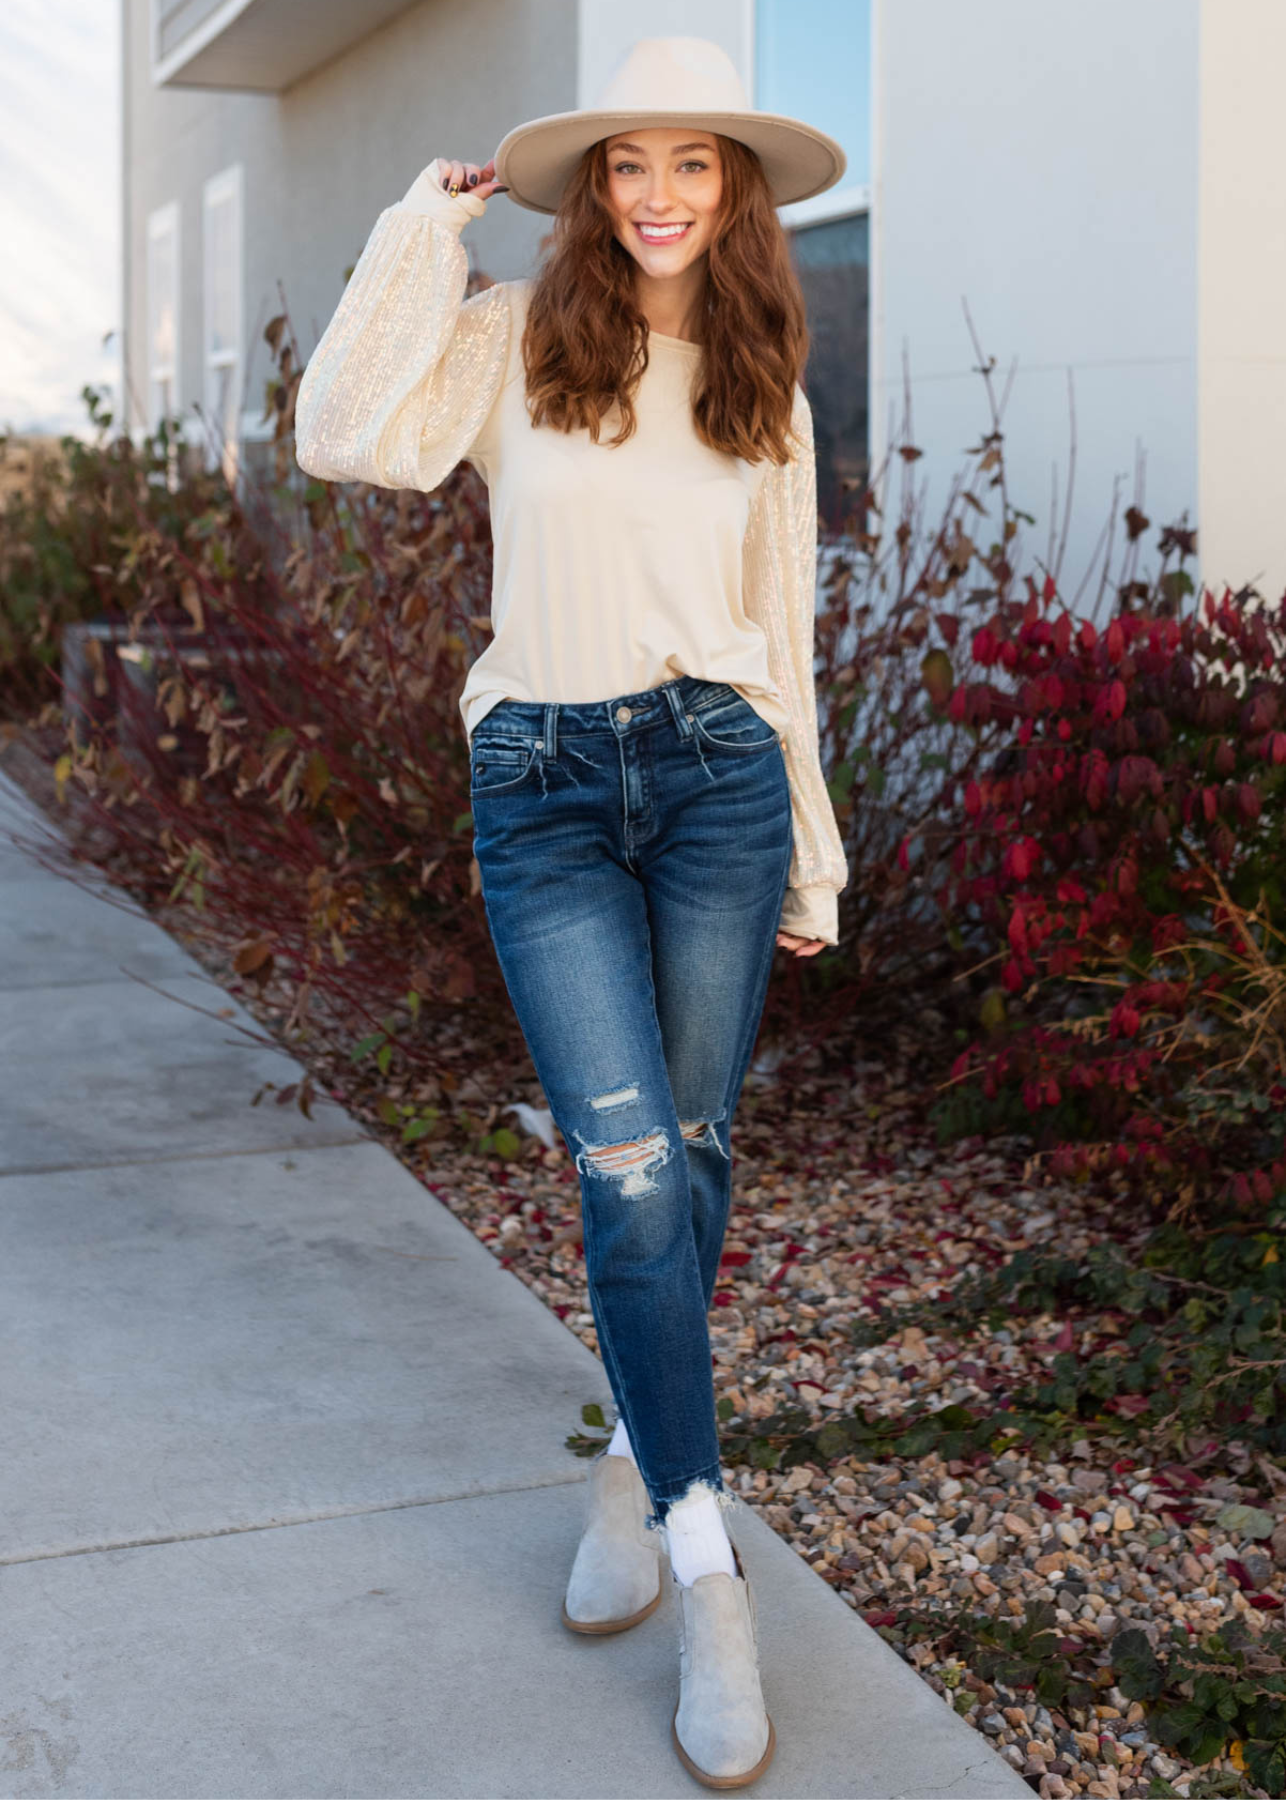 Cream top with long sleeves